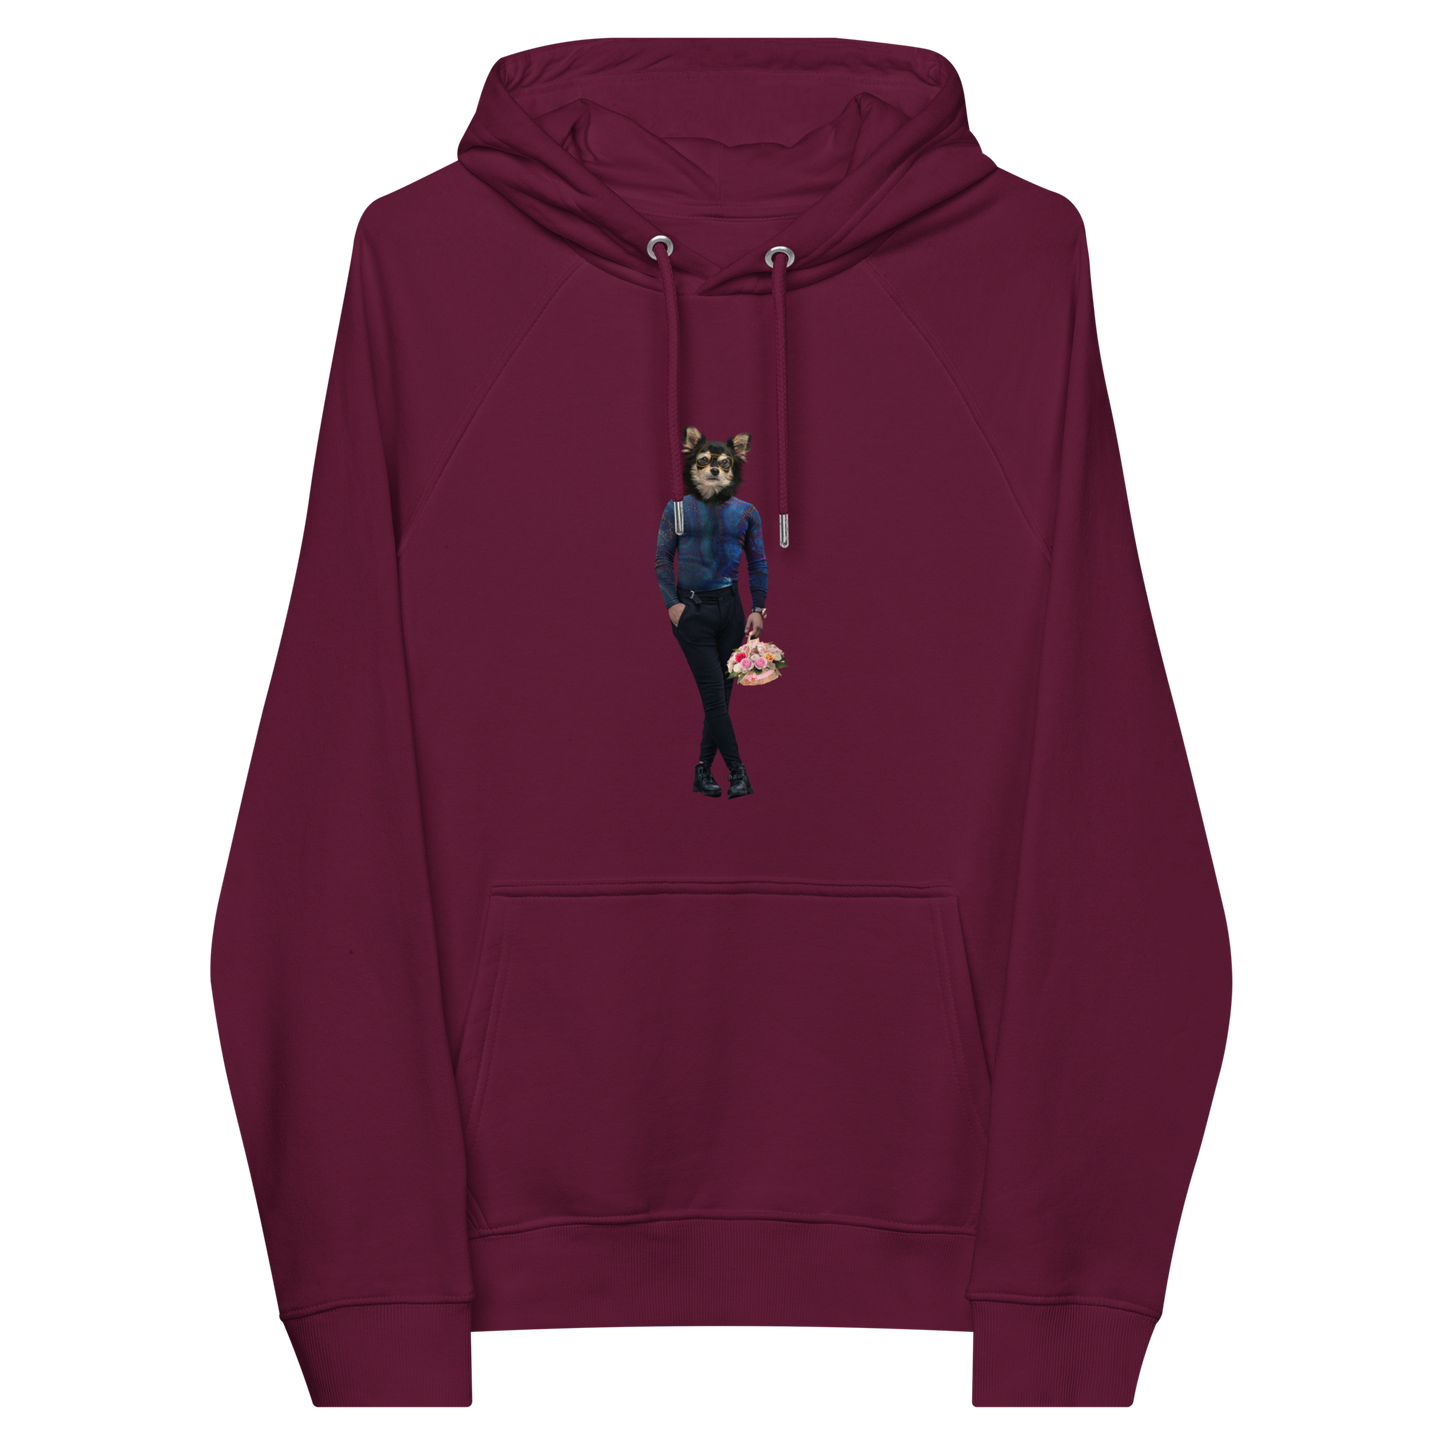 Burgundy Anthropomorphic Dog Raglan Hoodie featuring an adorable Anthropomorphic Dog graphic on the chest - Funny Graphic Dog Hoodies - Boozy Fox